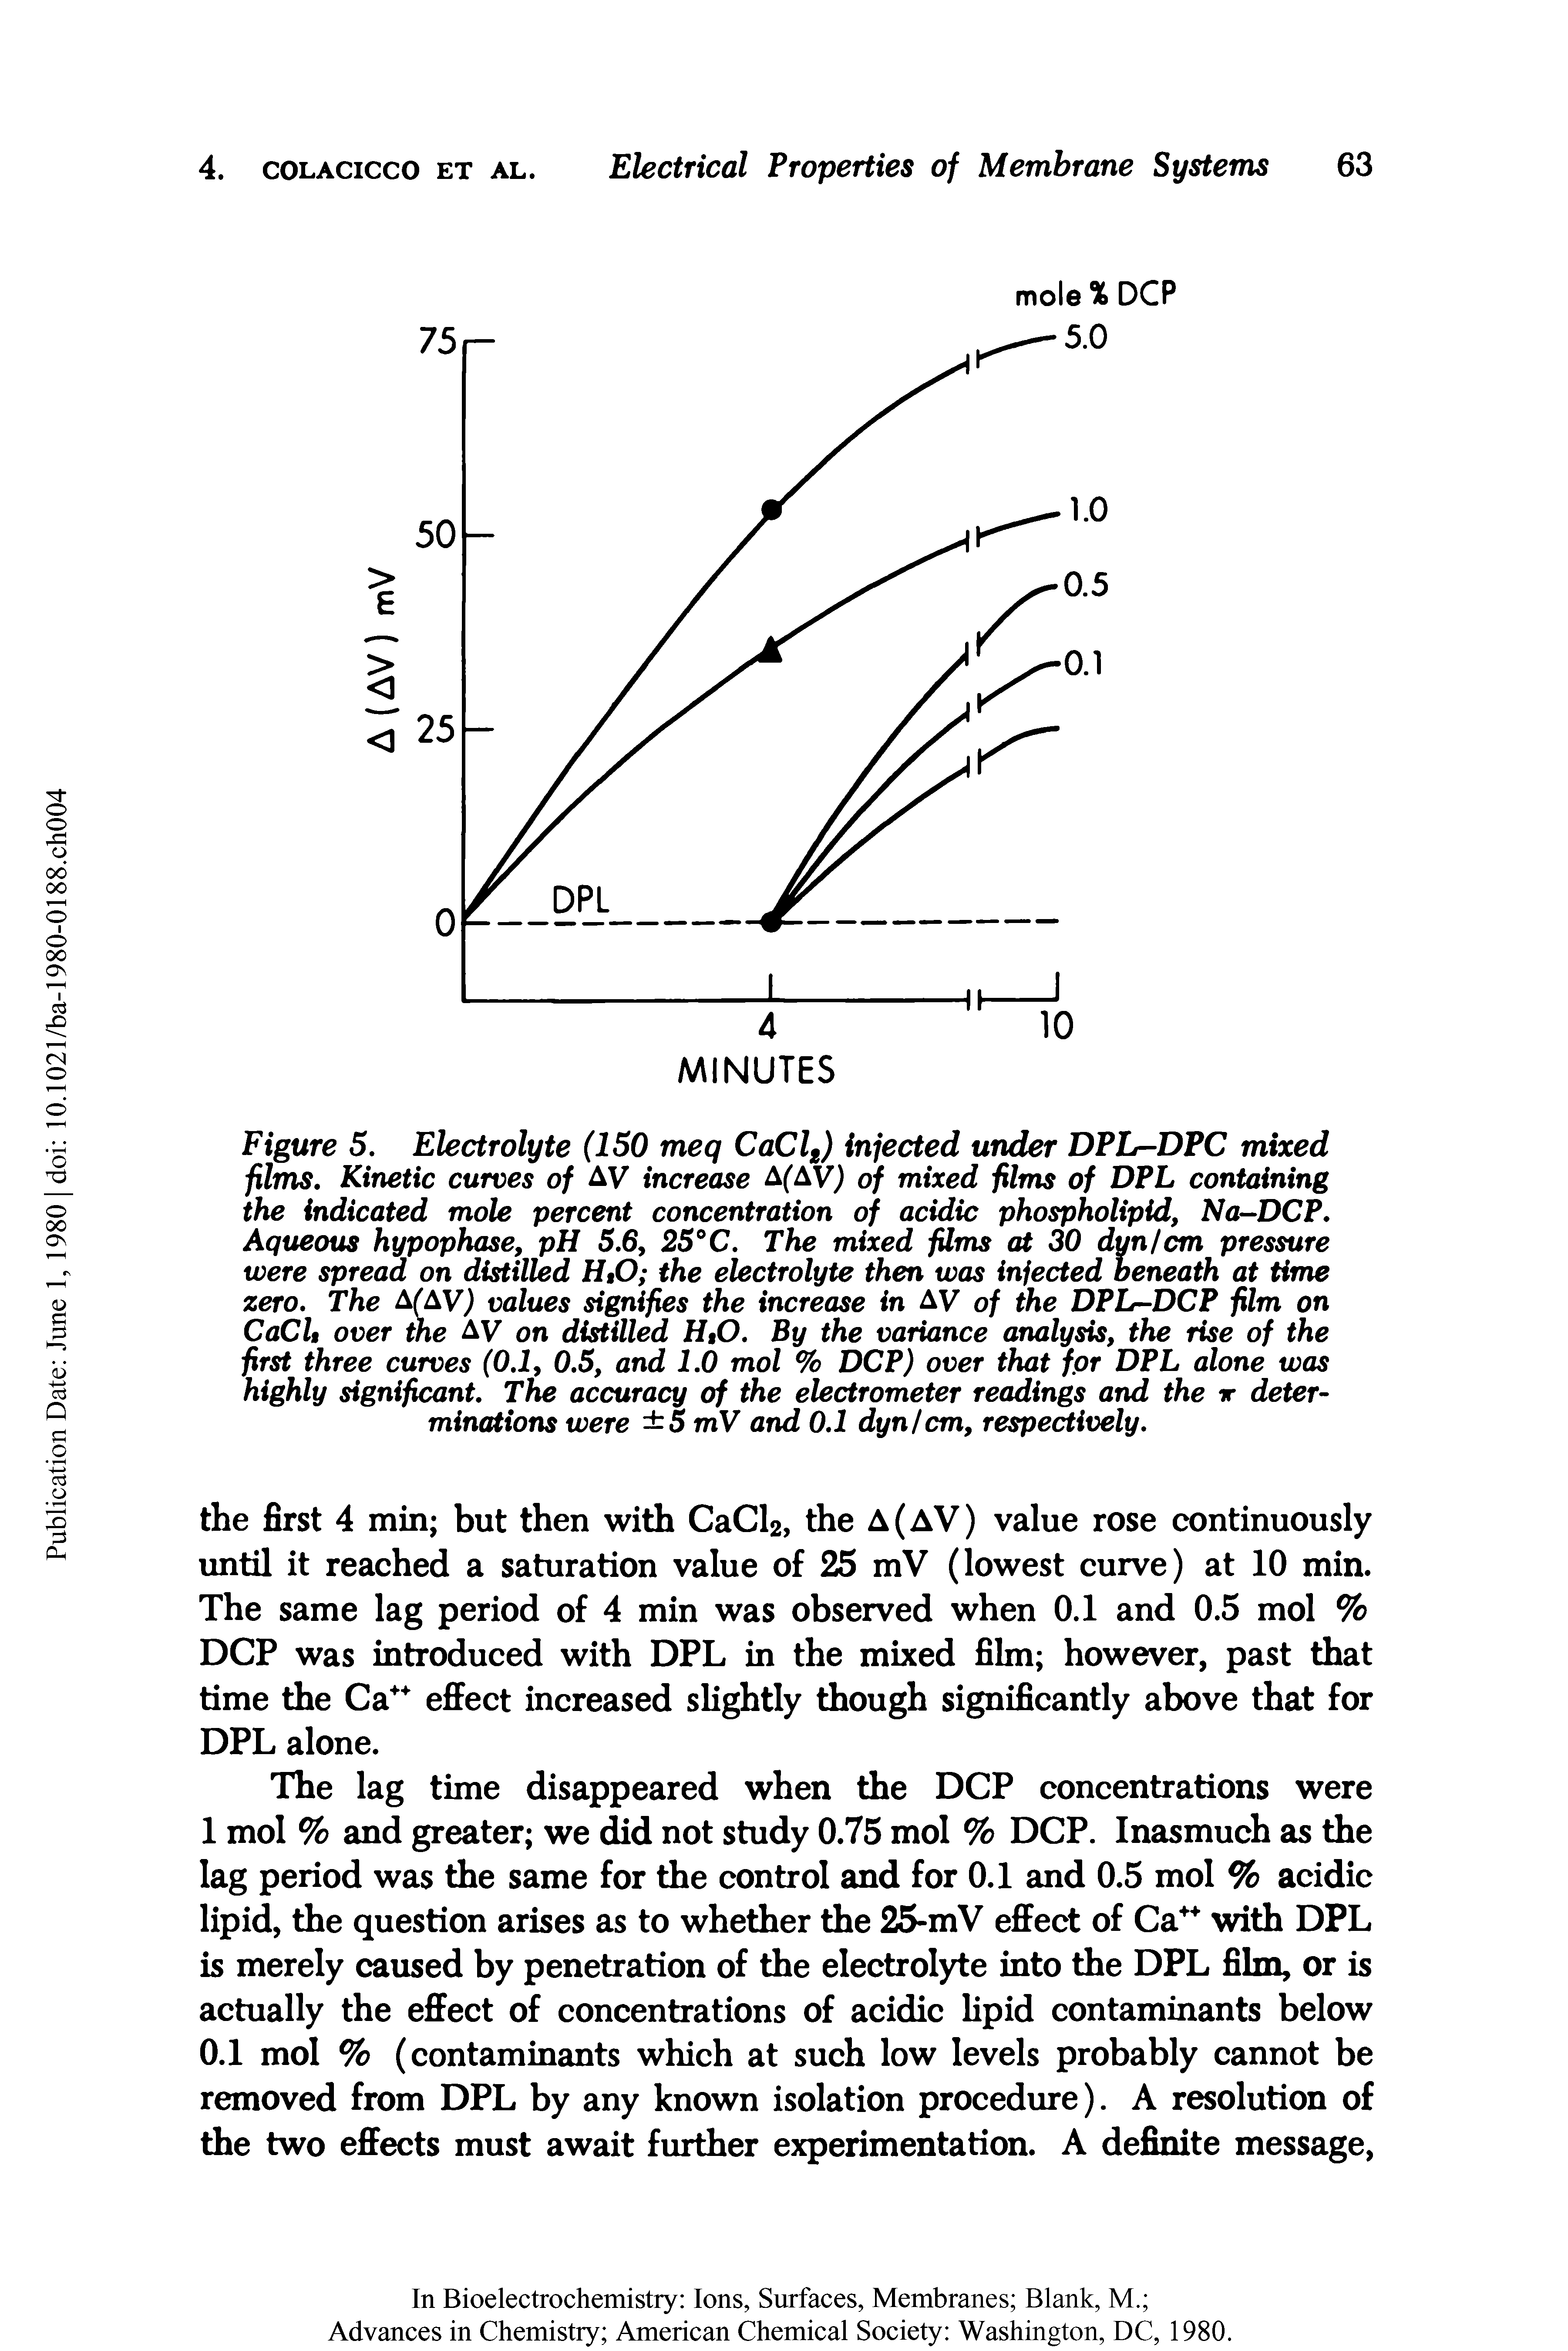 Figure 5. Electrolyte (150 meq CaClt) injected under DPL-DPC mixed films. Kinetic curves of AV increase AfAVj of mixed films of DPL containing the indicated mole percent concentration of acidic phospholipid, Na-DCP. Aqueous hypophase, pH 5.6, 25°C. The mixed films at 30 dun cm pressure were spread on distilled HtO the electrolyte then was injected beneath at time zero. The M V) values signifies the increase in AV of the DPL-DCP film on CaCU over the AV on distilled HtO. By the variance analysis, the rise of the first three curves (0.1, 0.5, and 1.0 mol % DCP) over that for DPL alone was highly significant. The accuracy of the electrometer readings and the r determinations were 5 mV and 0.1 dyn/cm, respectively.